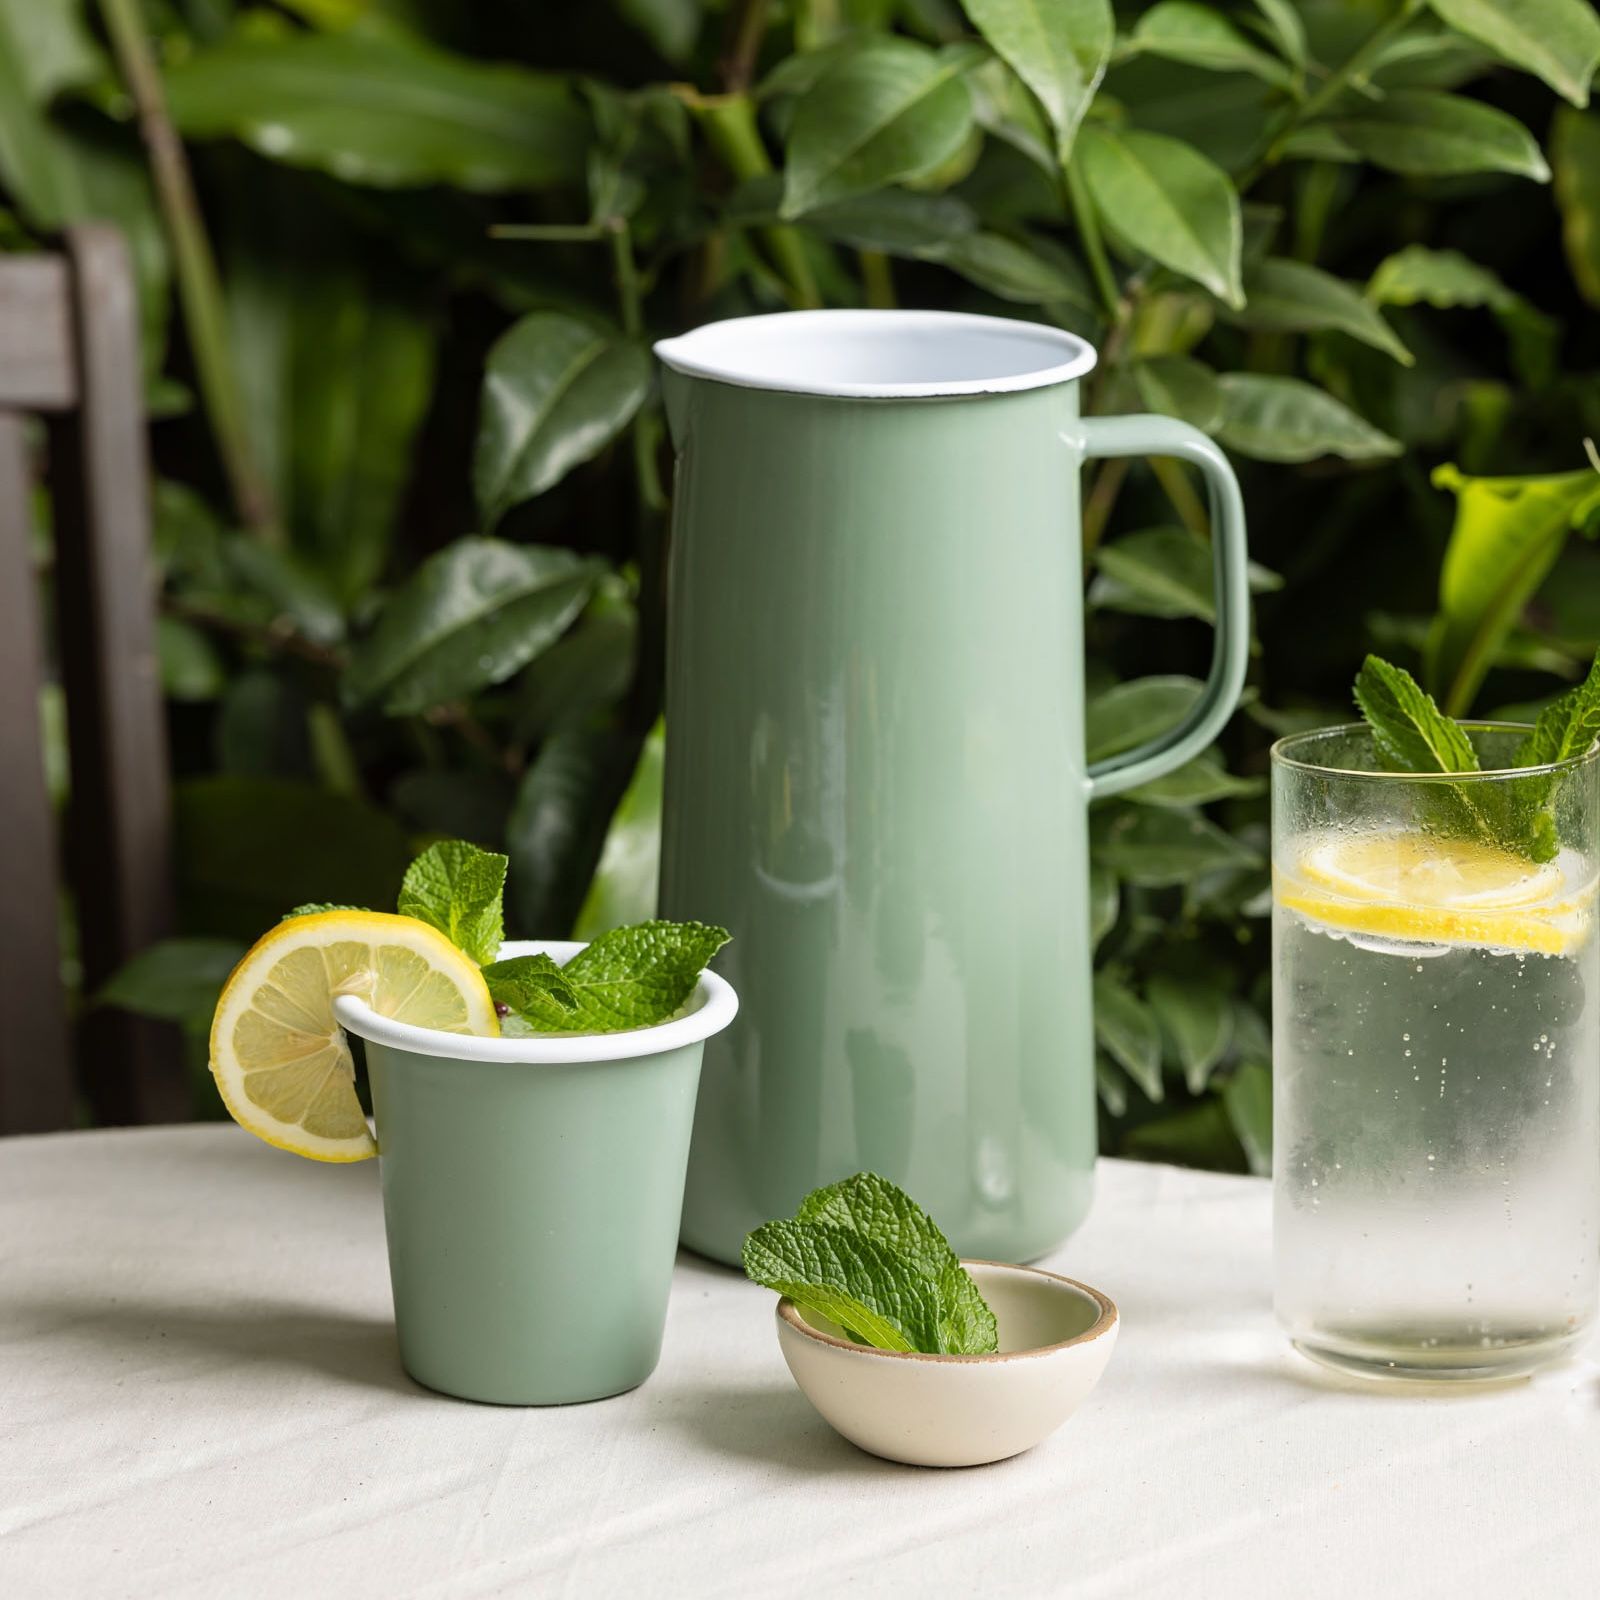 On an outdoor table, sits an enamel pitcher and cup in a soft sage green color. The cup is topped with mint and a lemon slice. Nearby is a glass of water with lemon and a tiny bowl filled with mint leaves.